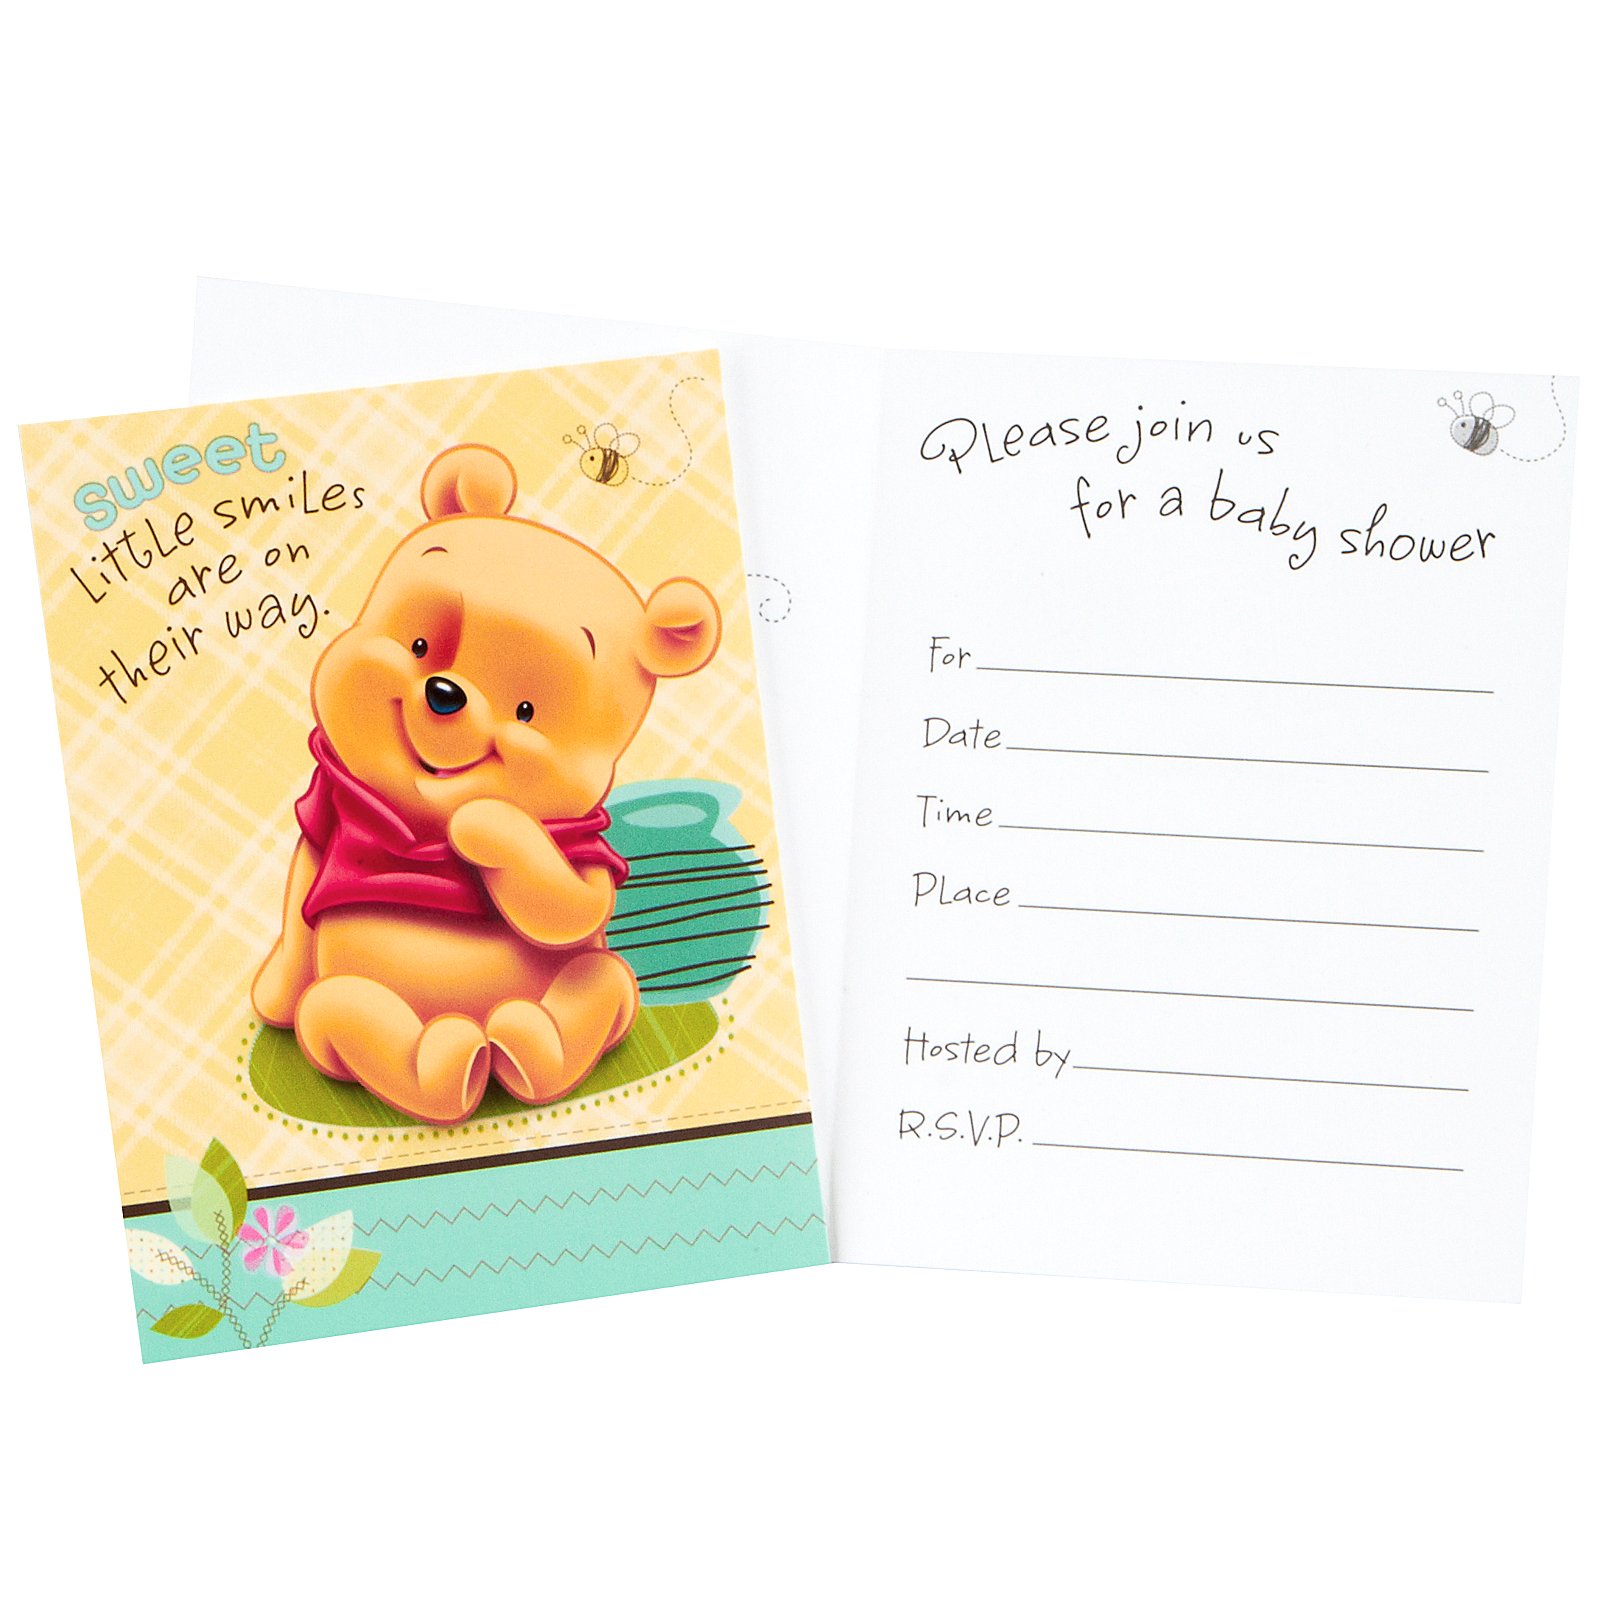 Winnie The Pooh Design for Your Baby Shower Invitations DolanPedia